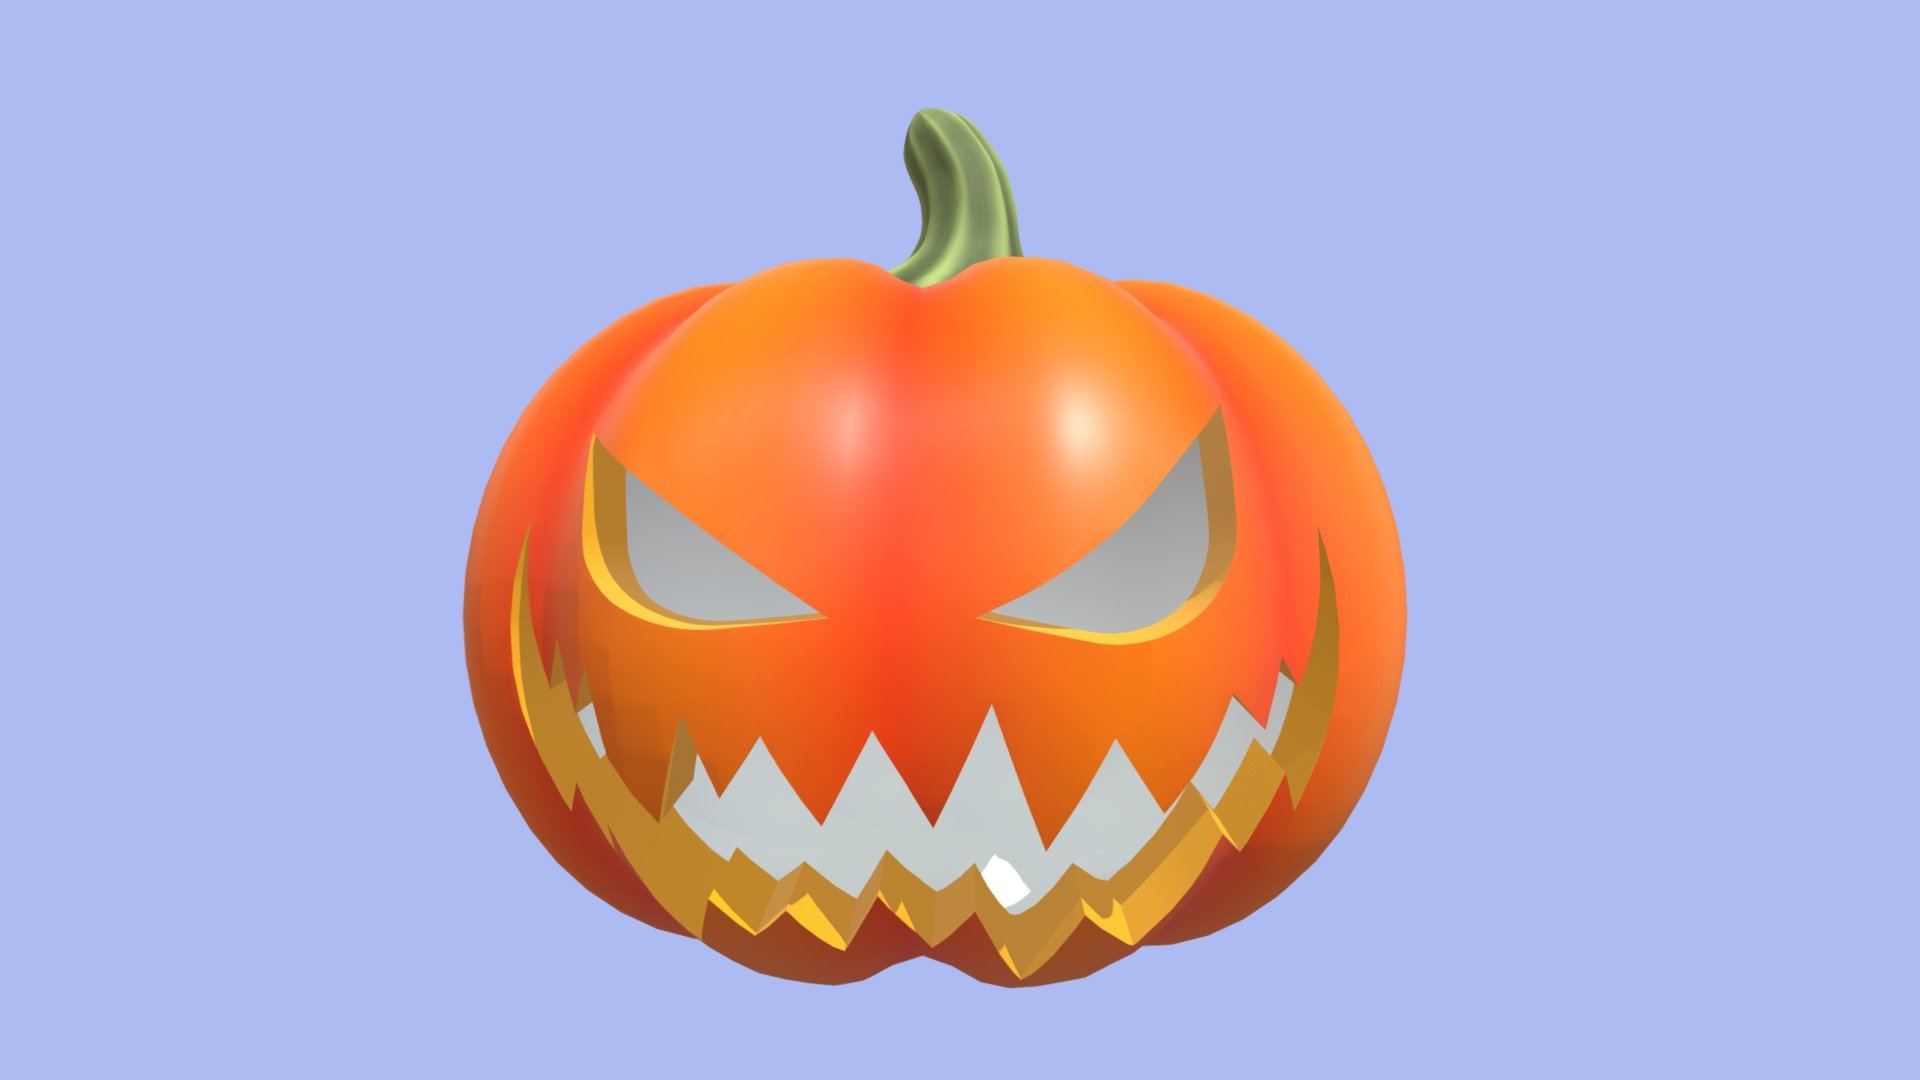 Halloween Pumpkin Jack O' Lantern

Chibi Character 3d Model.

The 3d model is created in Blender 3.4.1

Preview images are rendered in Blender Cycle.

6,906 poly

7,269 vertices

Texture: 2048 x 2048 PNG

The 3d model can be used as property in interior design, architectural design, game development, special event, mascot of products, action figure, 3d printing, or other needs.

Instagram: figoorin

All 3d models created by Yuprita R 3d model